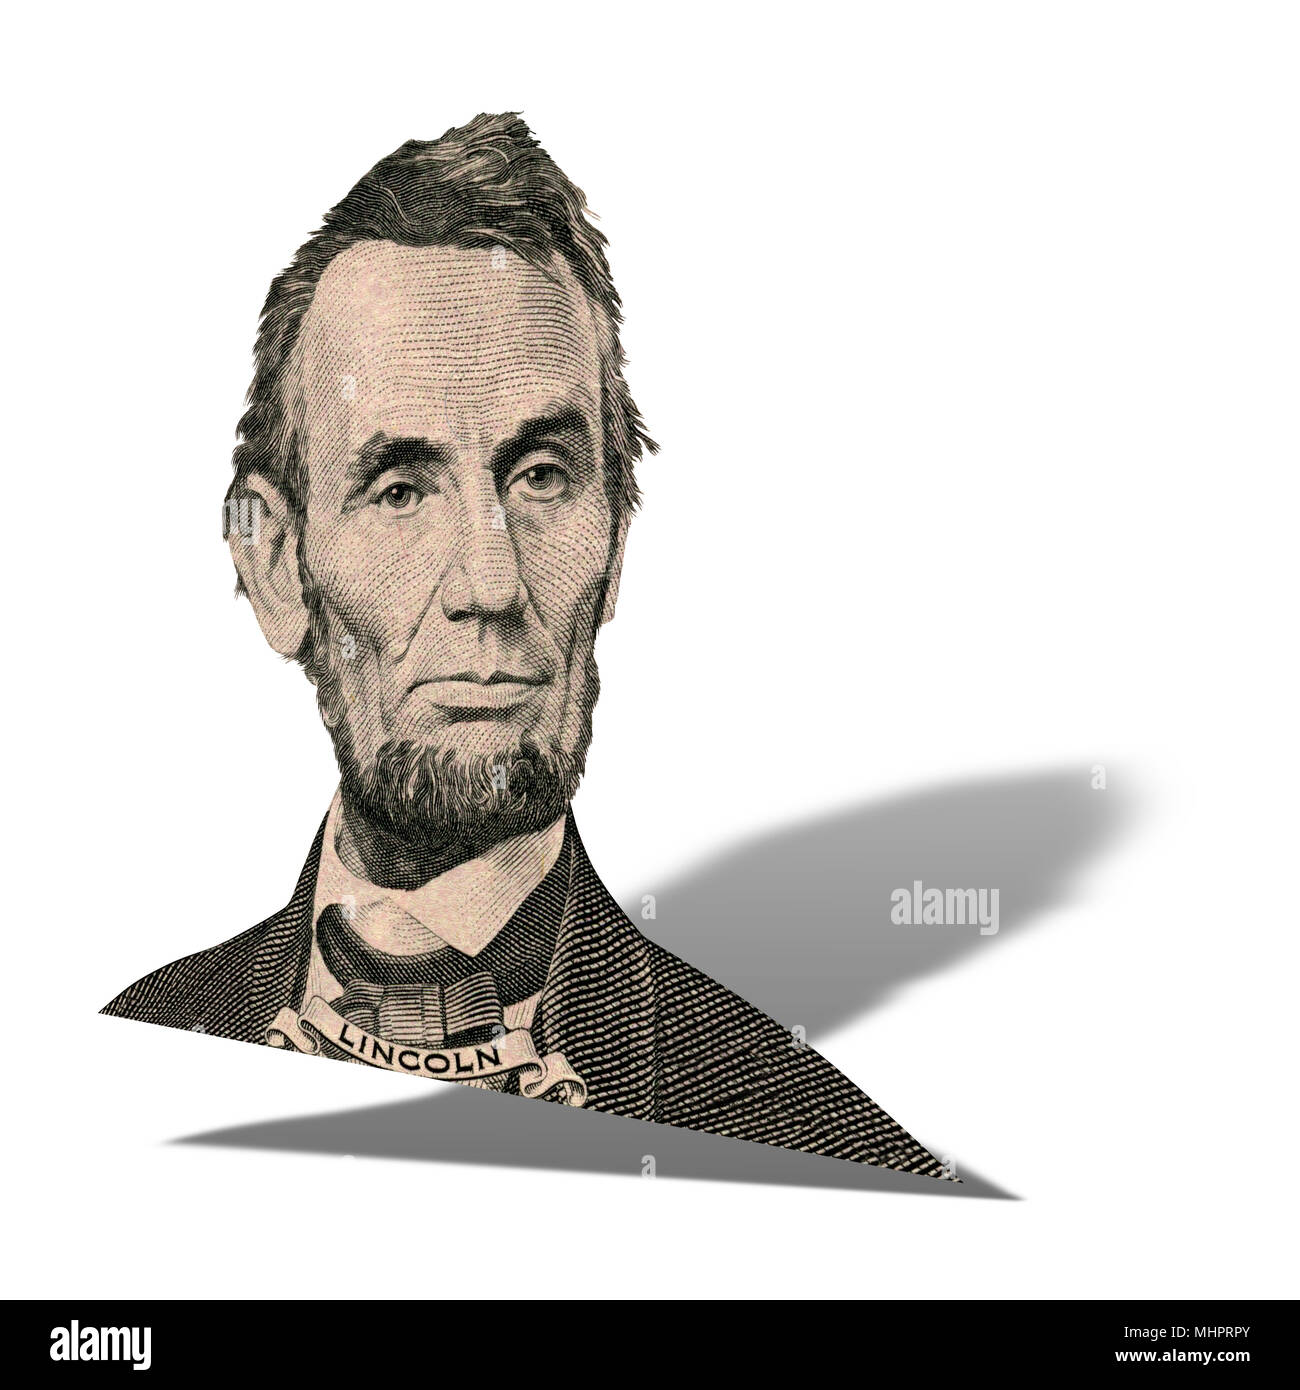 Portrait of former U.S. president Abraham Lincoln as he looks on five dollar bill obverse. Photo at an angle of 15 degrees, with a shadow. Stock Photo